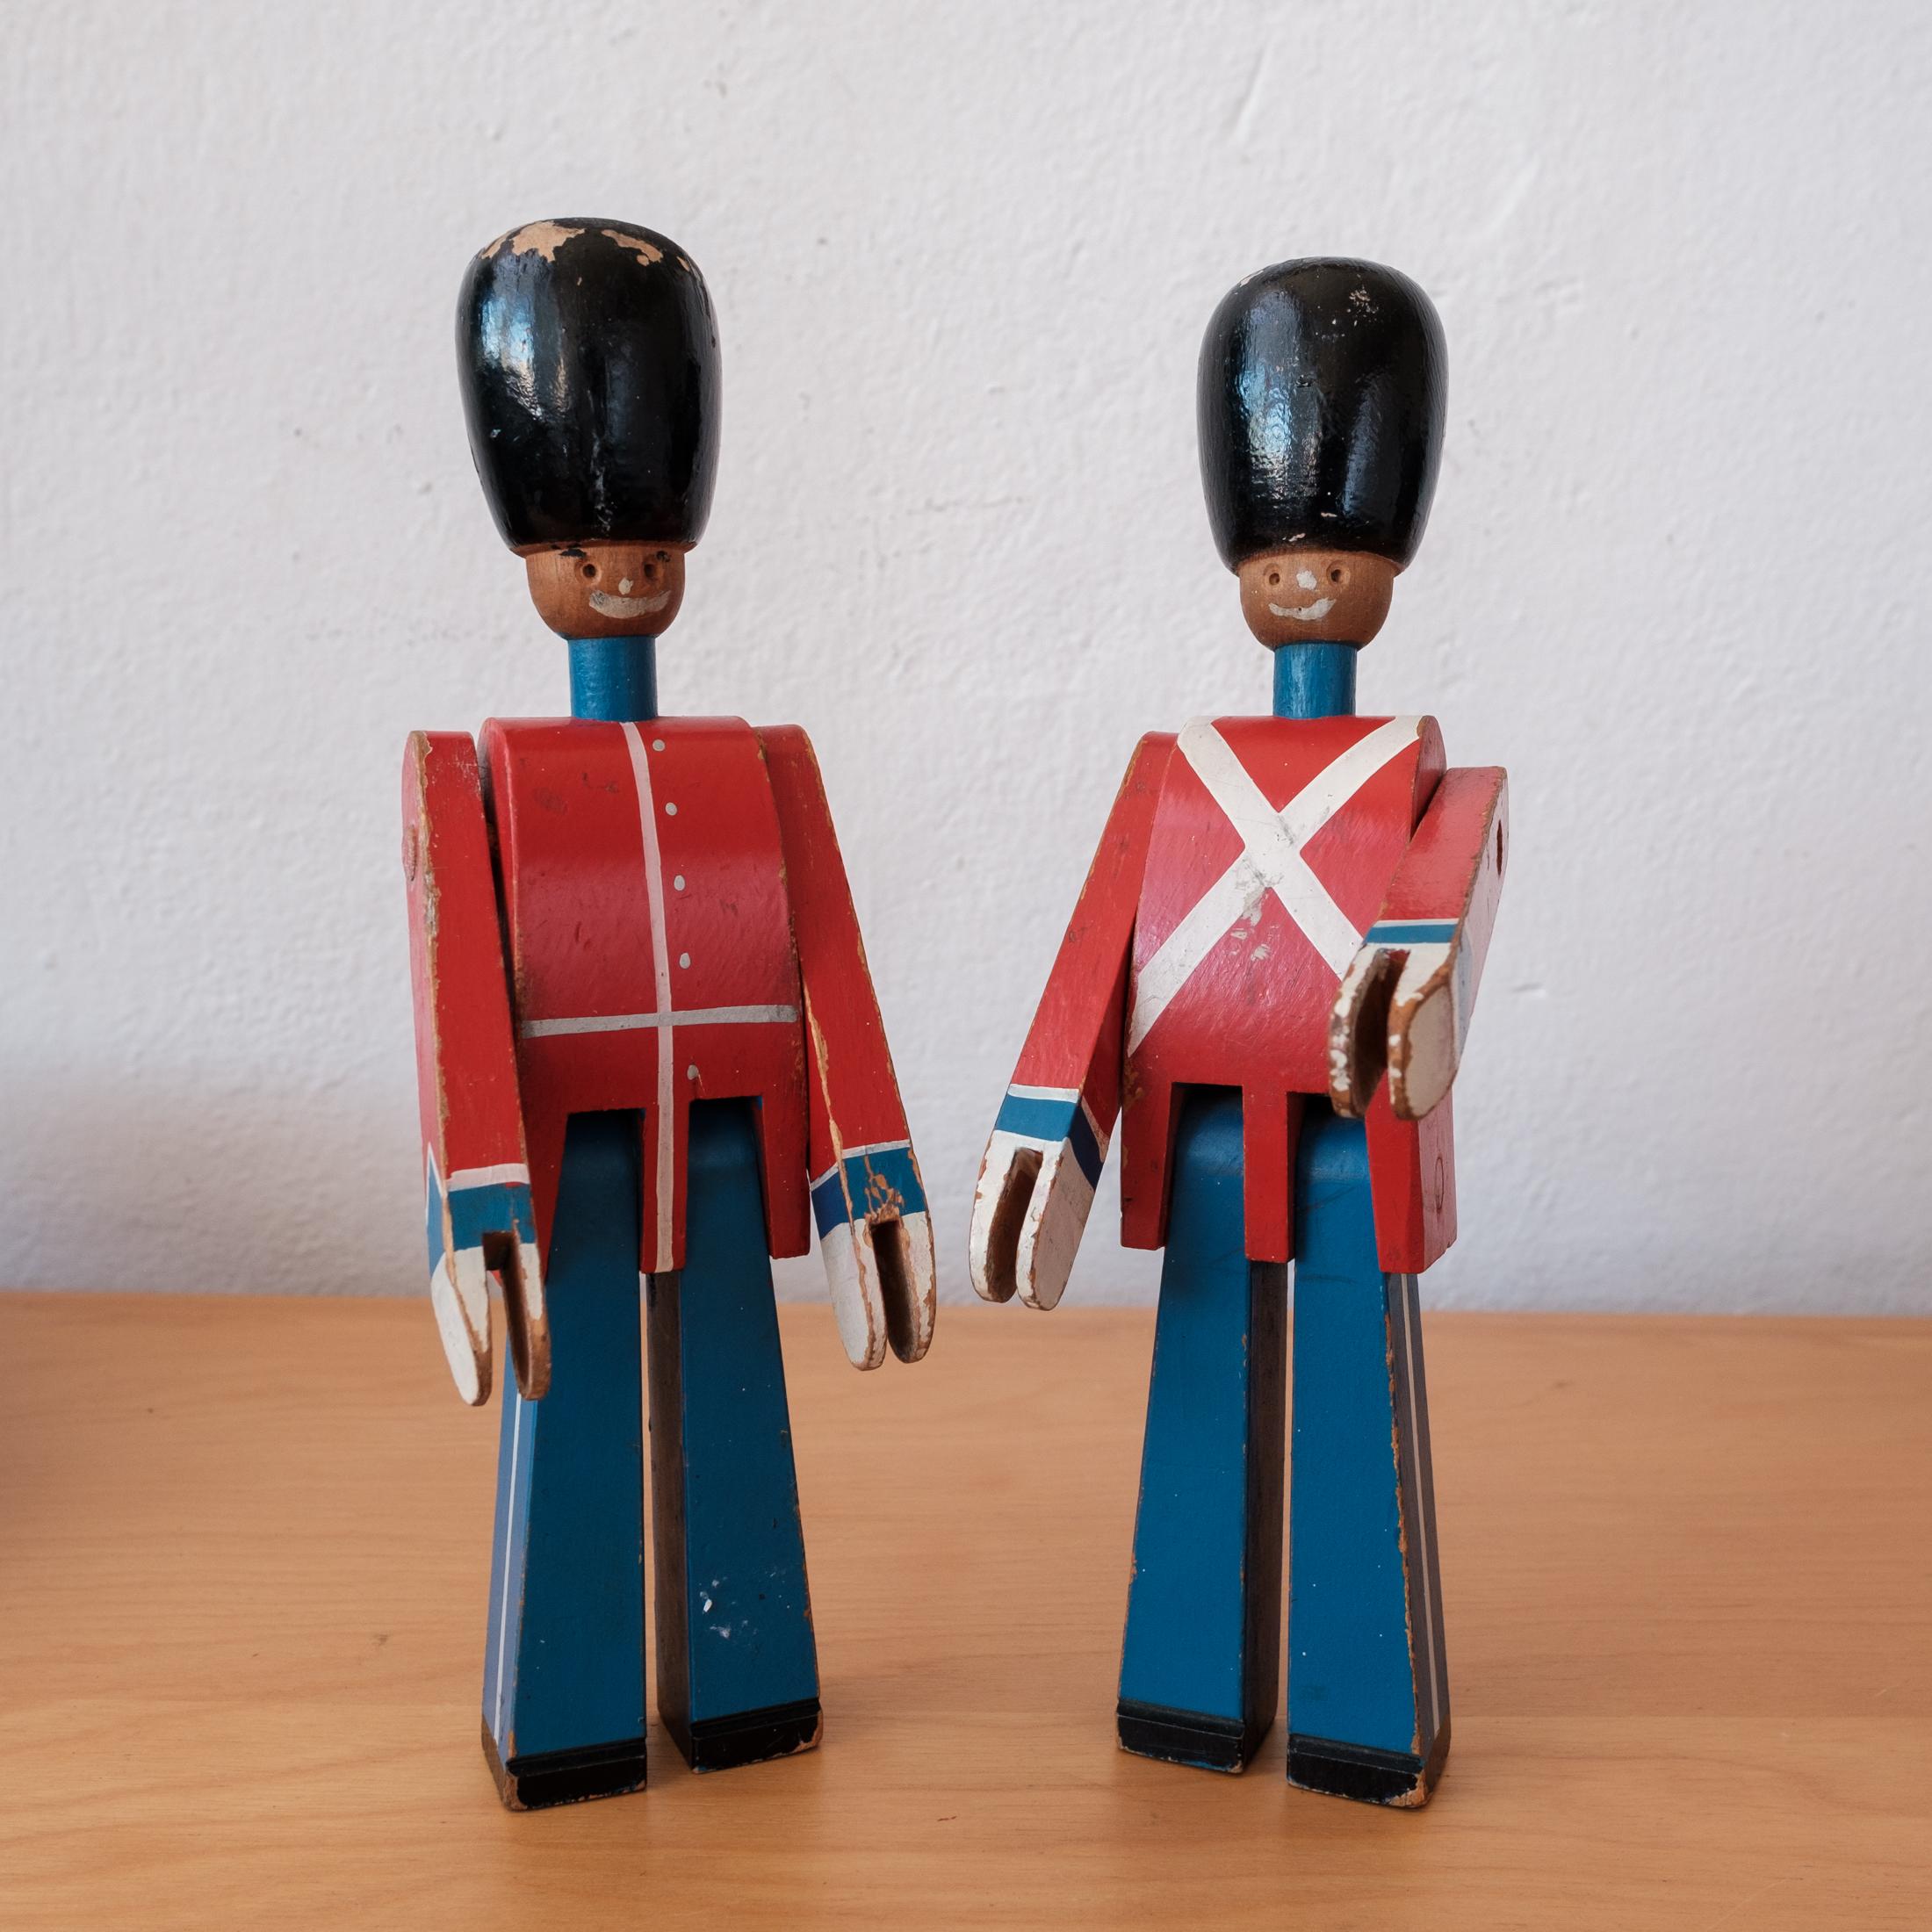 A pair of Royal guardsmen designed by Kay Bojesen. Each soldier Includes a 1950s Magasin du Nord labels. Lovingly used with lots of patina. Denmark, 1950s.